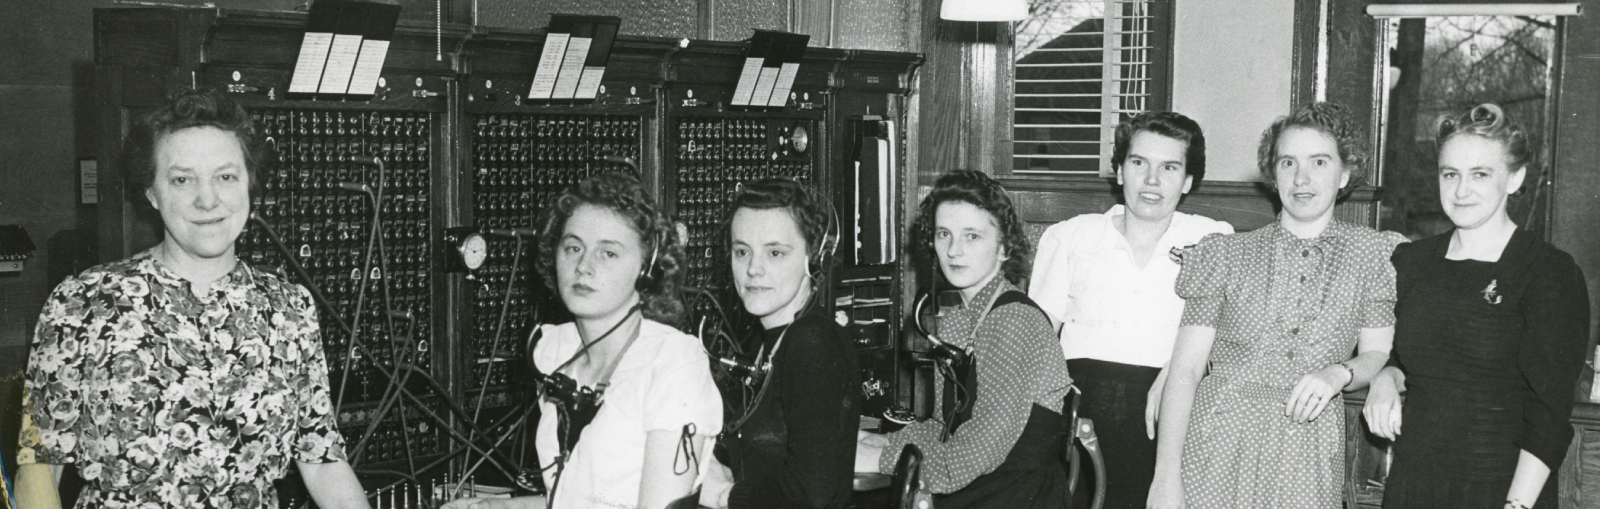 Black and white photo of women working at a telephone switchboard.